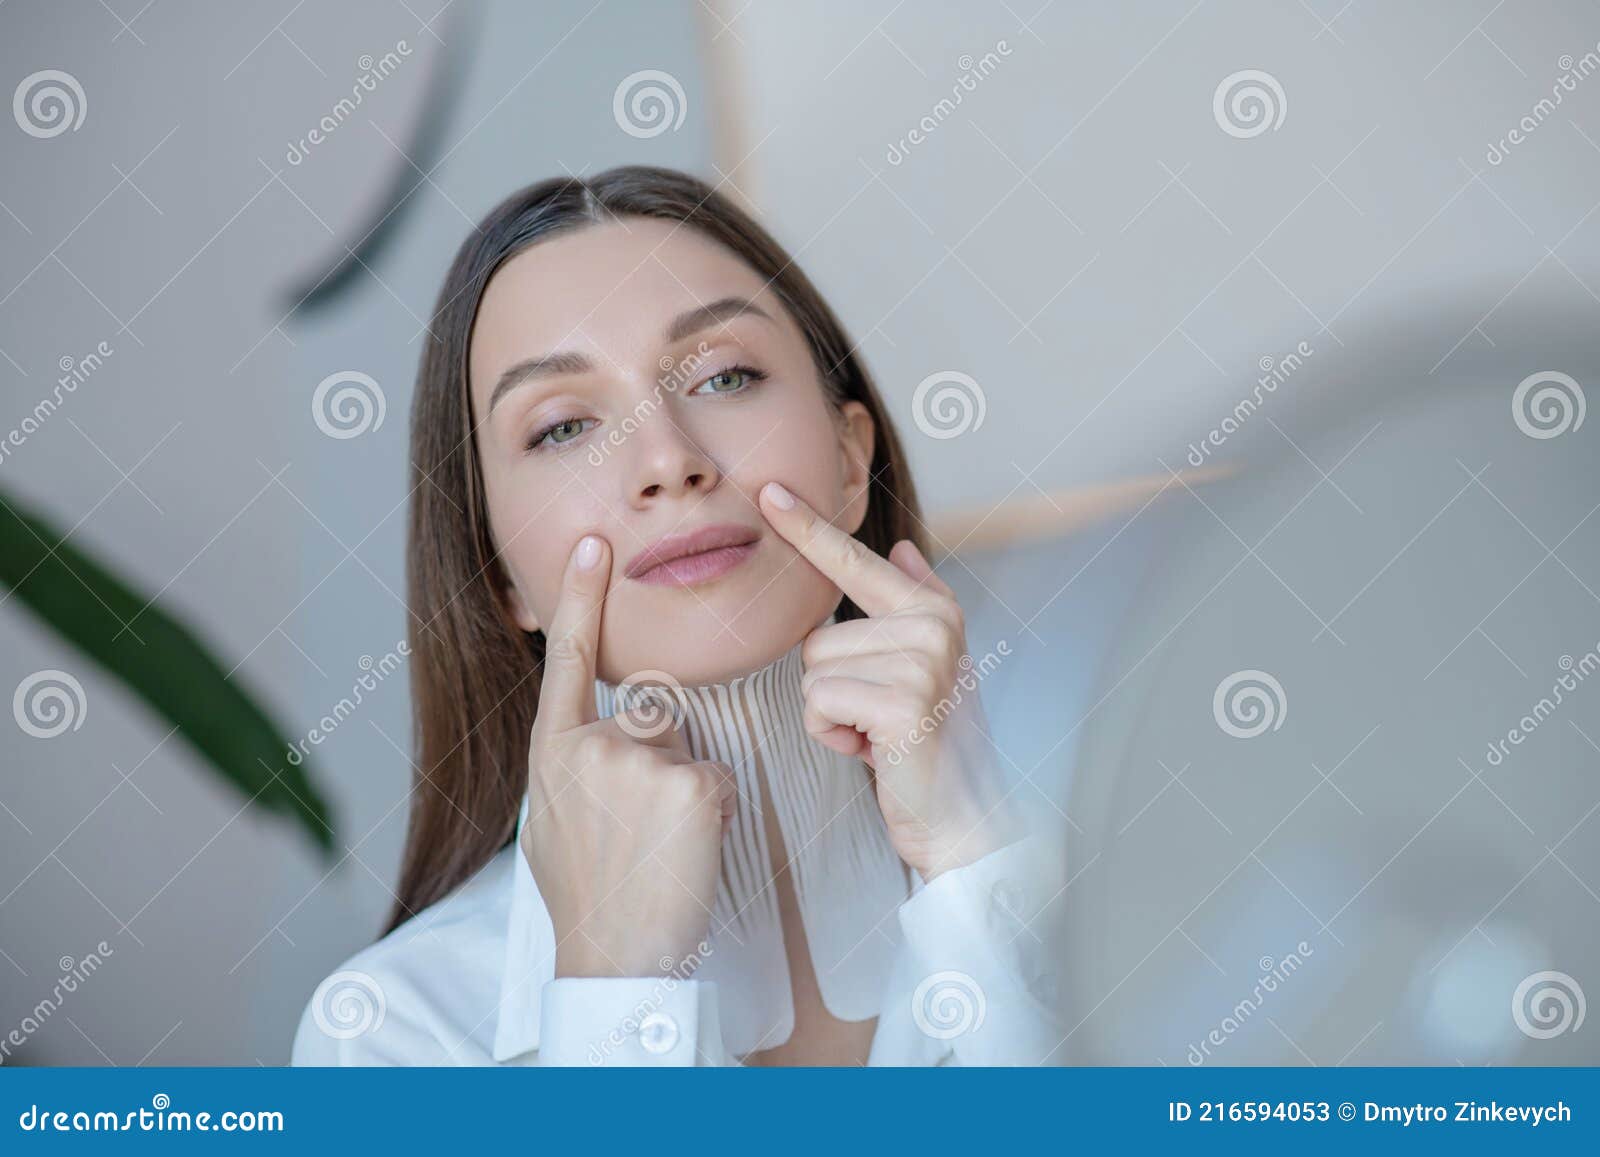 Cute Young Woman Doing Face Massage And Looking Relaxed Stock Image